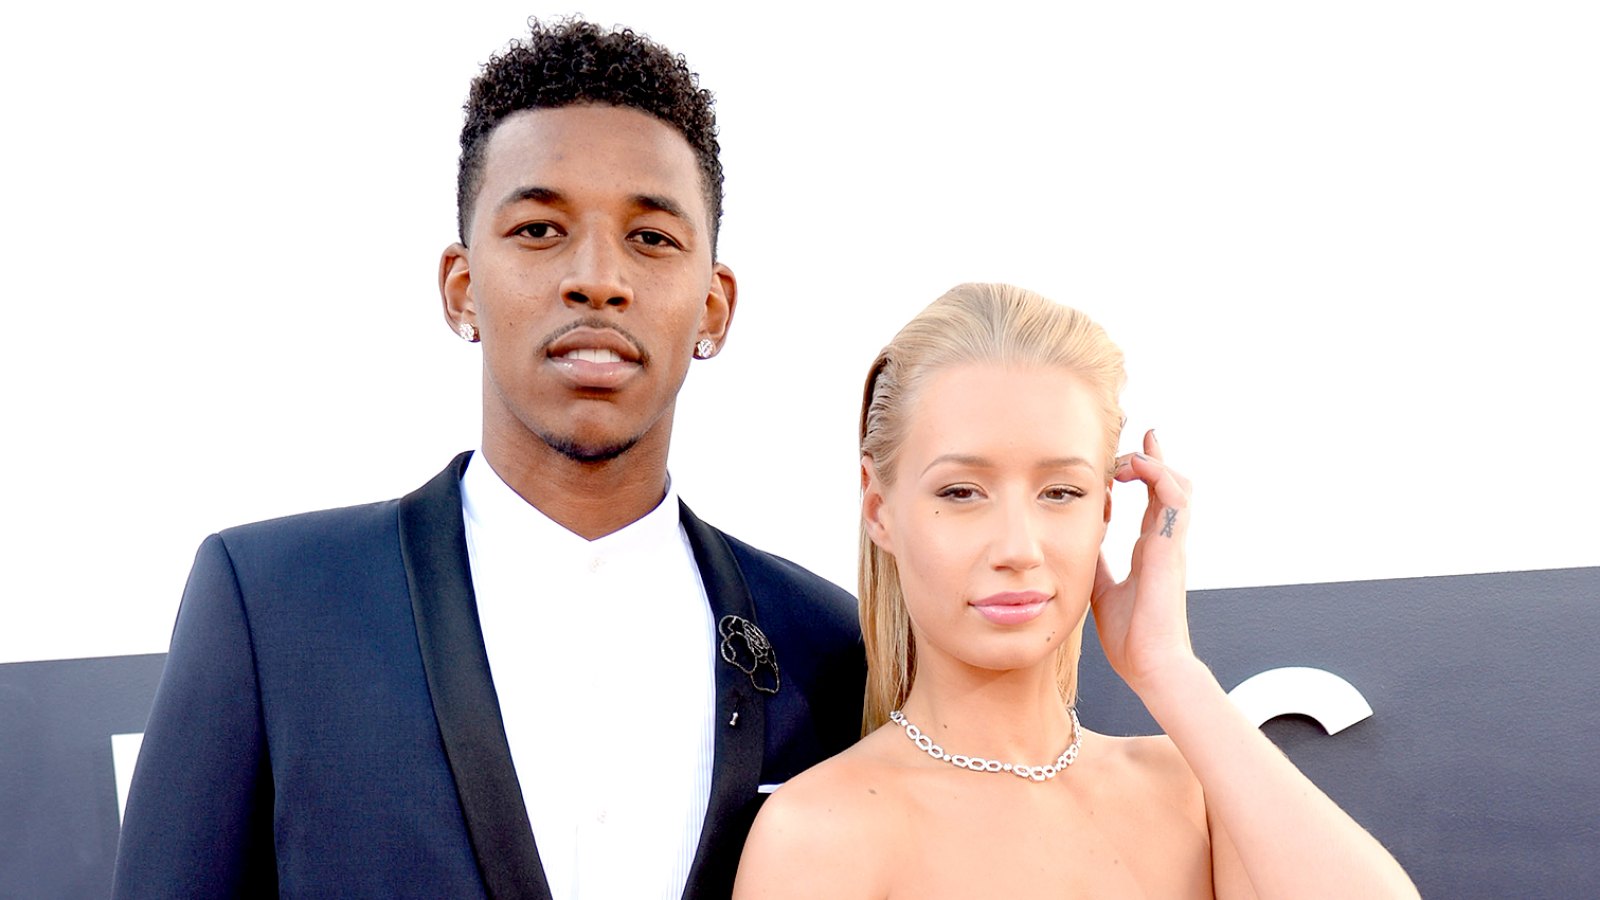 Nick Young and Iggy Azalea attend the 2014 MTV Video Music Awards.